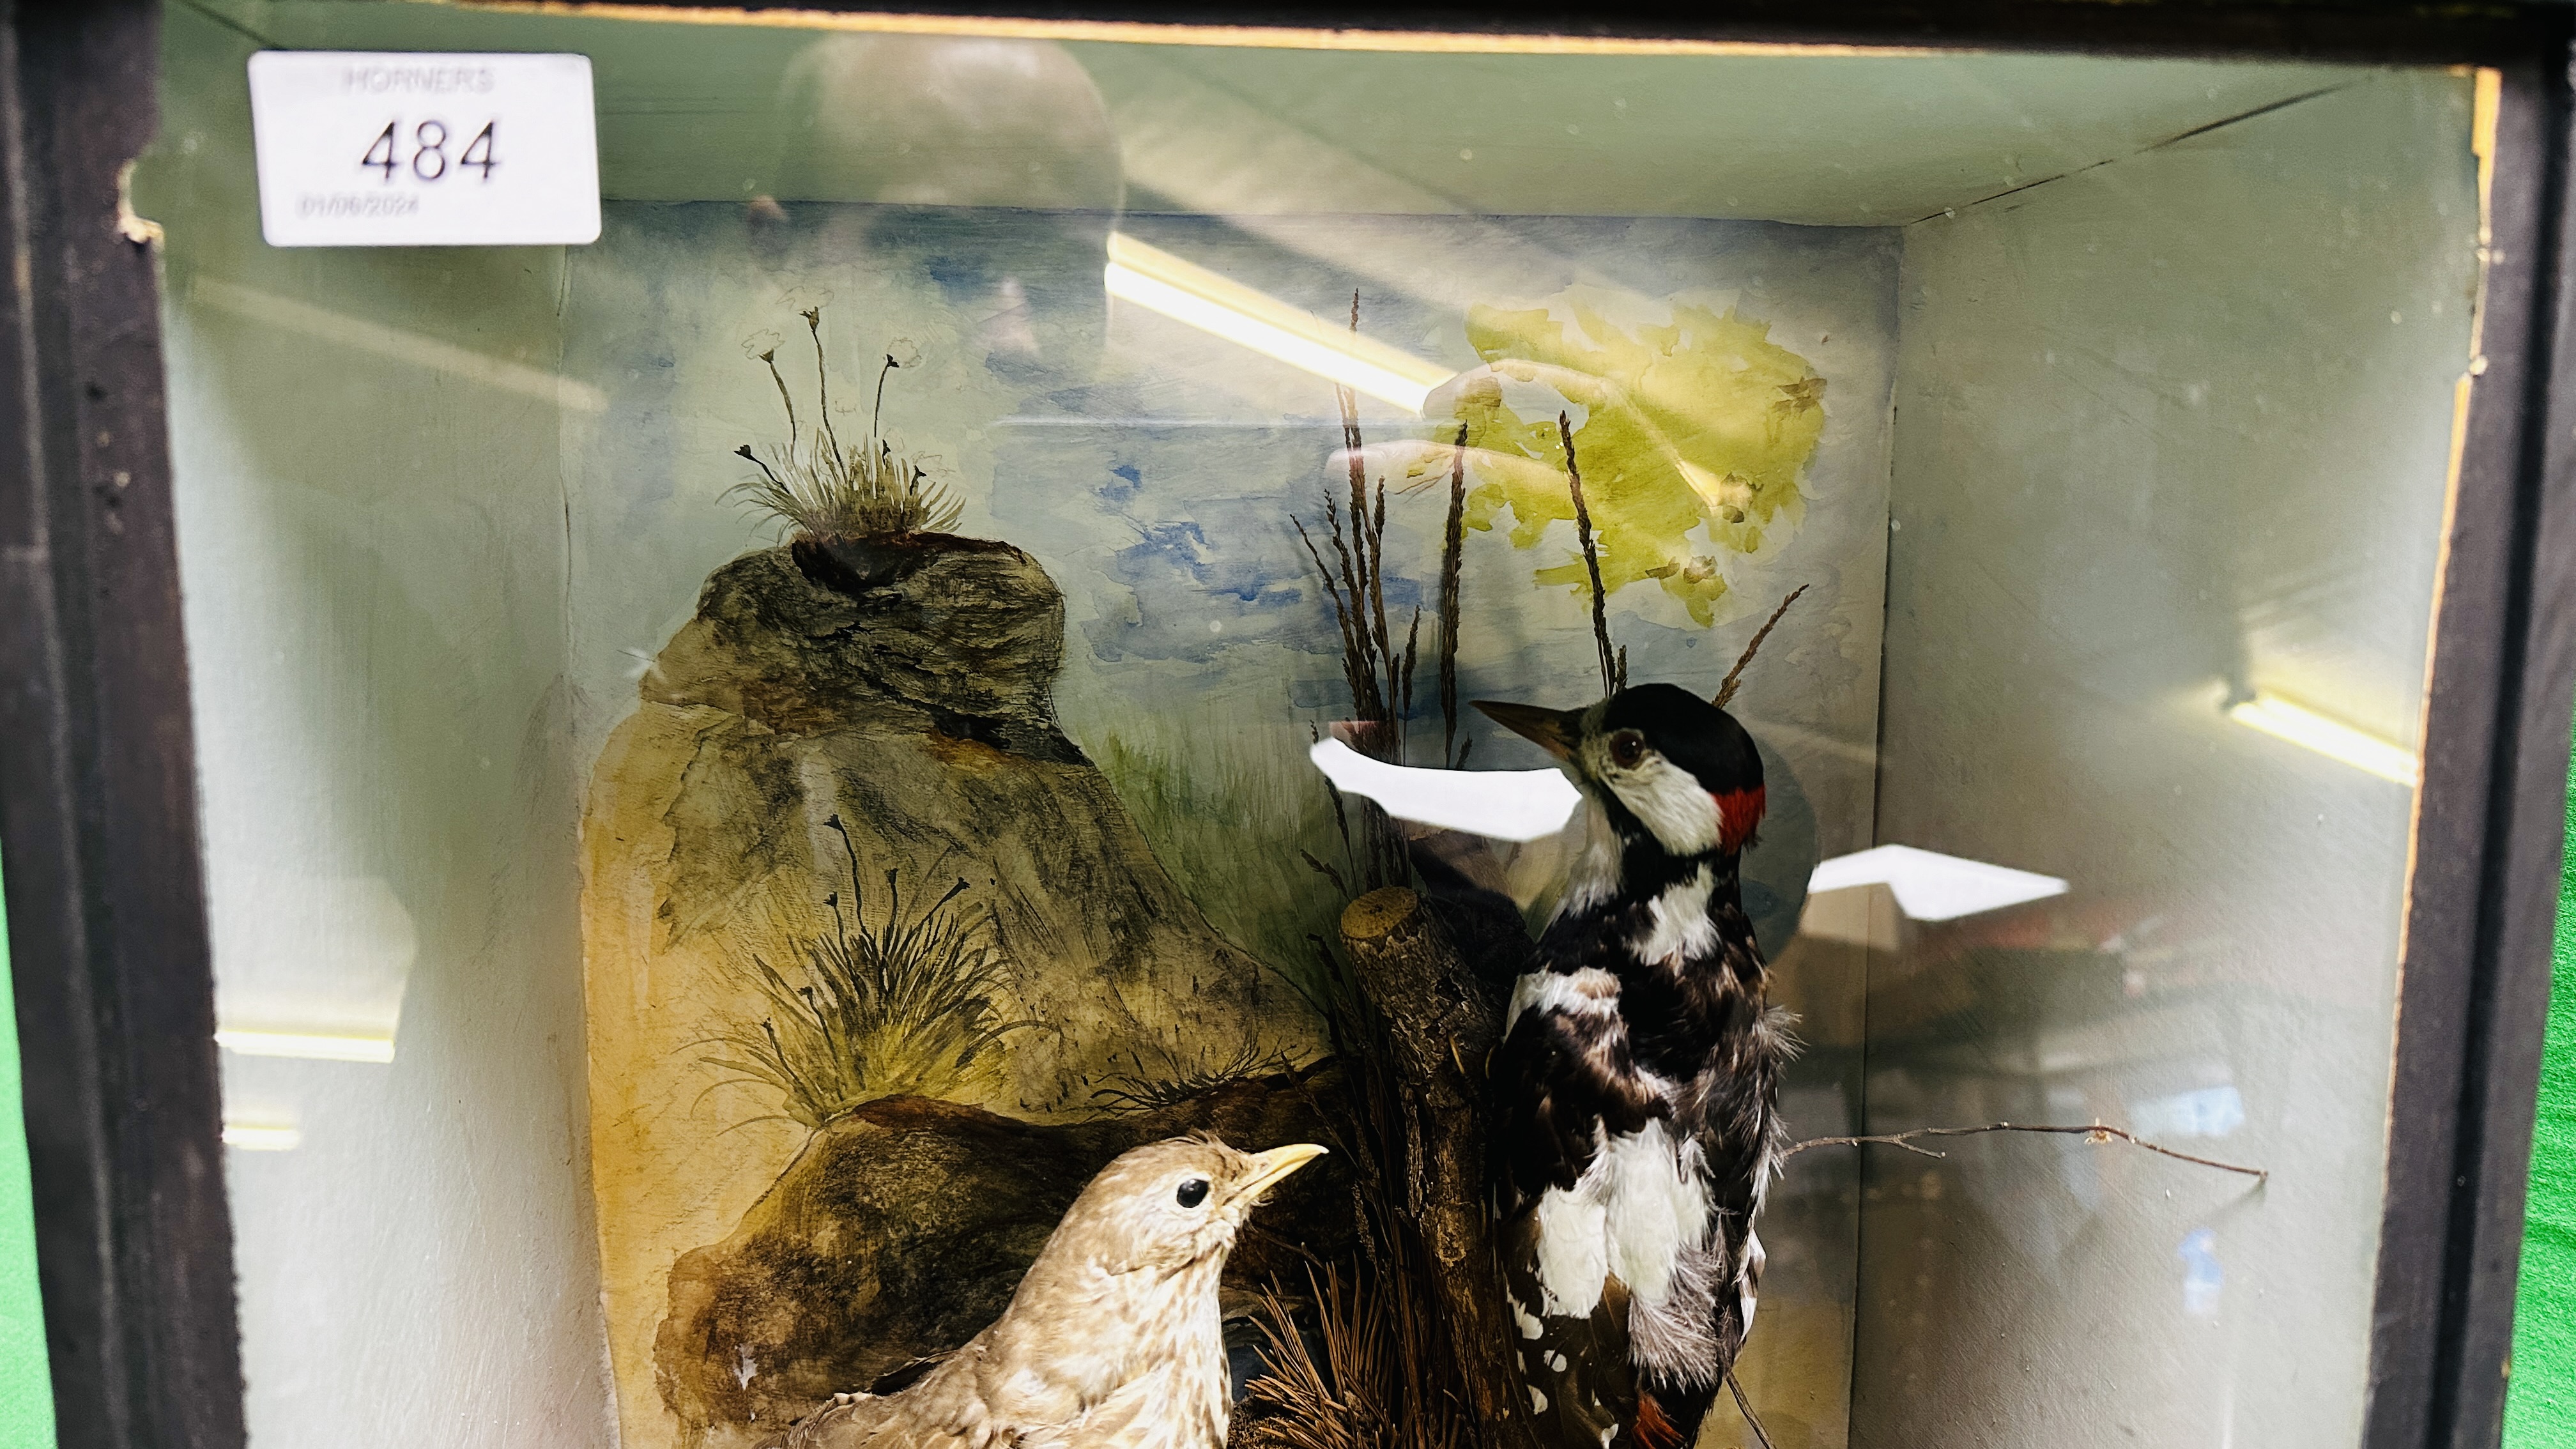 TAXIDERMY: A CASED STUDY OF A MOUNTED GREATER SPOTTED WOODPECKER AND A THRUSH IN A NATURALISTIC - Image 6 of 7